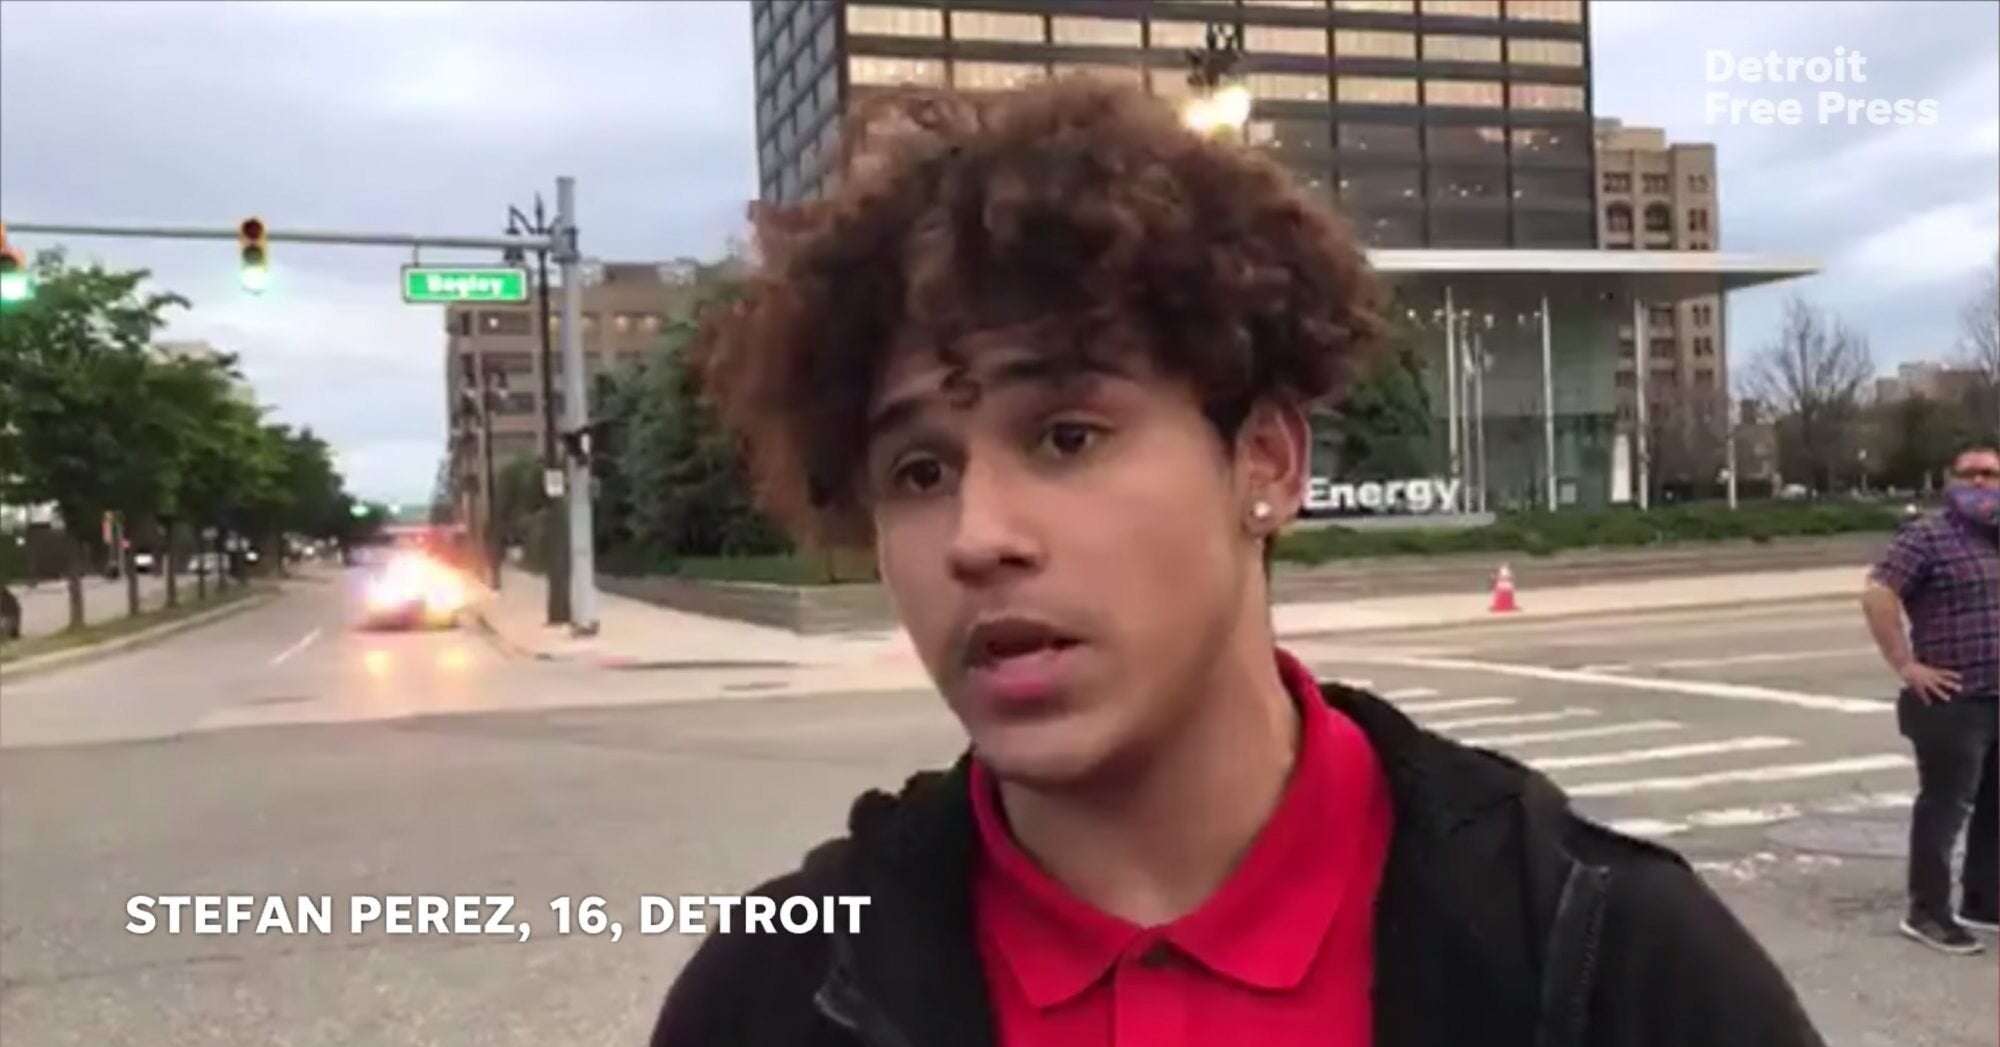 image for 'Remarkable' 16-Year-Old Praised for Leading Peaceful Protests in Detroit: 'I Made a Mark'